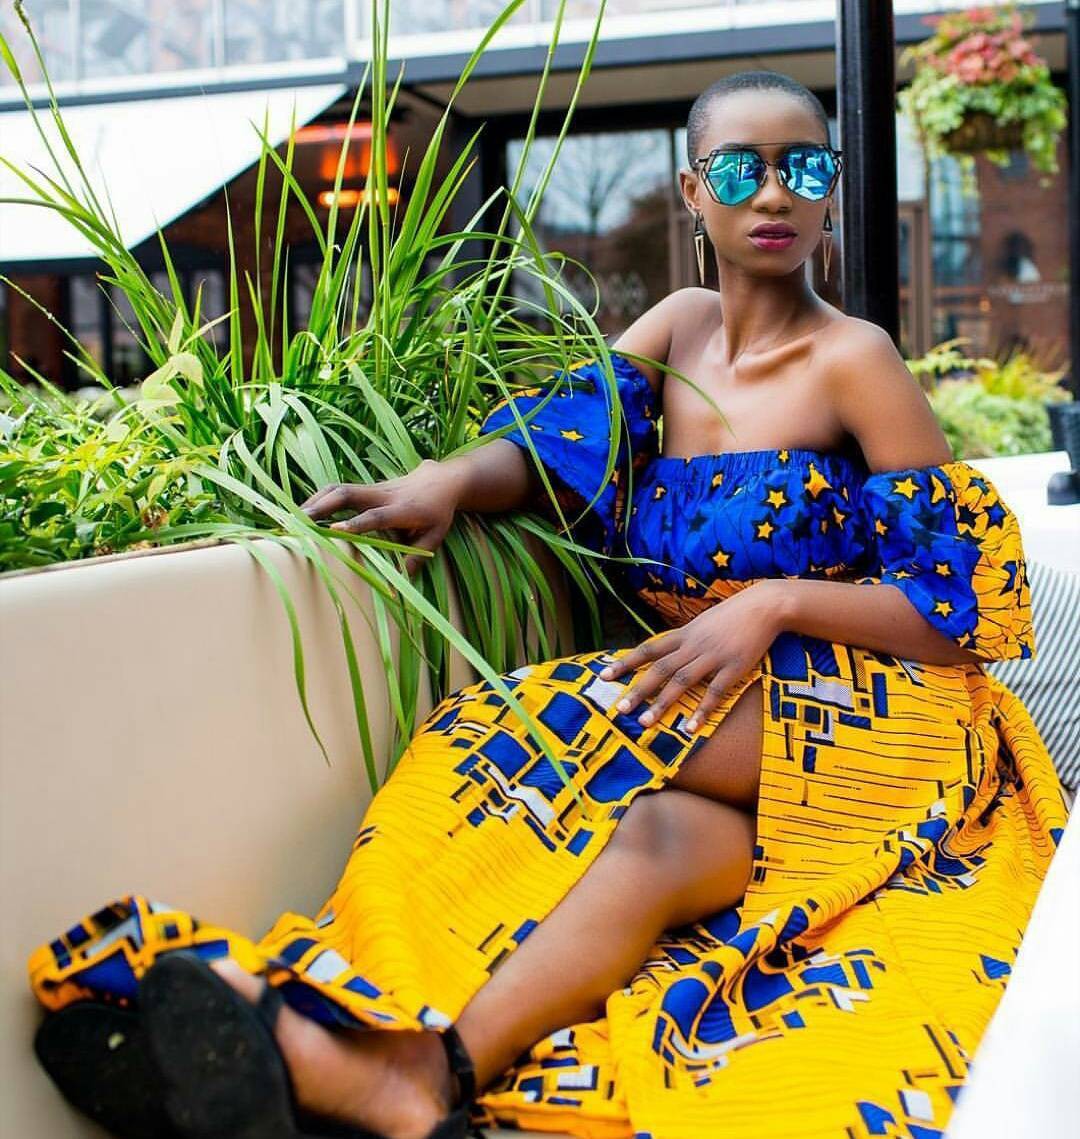 Lovely Afro Outfit Design For Female: instastyle,  FASHION,  African Clothing,  Stylevore,  instafashion,  Ankara Outfits,  Ankara Dresses,  African Attire,  Printed Ankara,  African Dresses,  Printed Dress,  bellanaija,  instaglam,  Cool Fashion,  Africangirlskillingit,  blackgirlmagic,  blackqueen,  styleinspiration,  styleaddict  